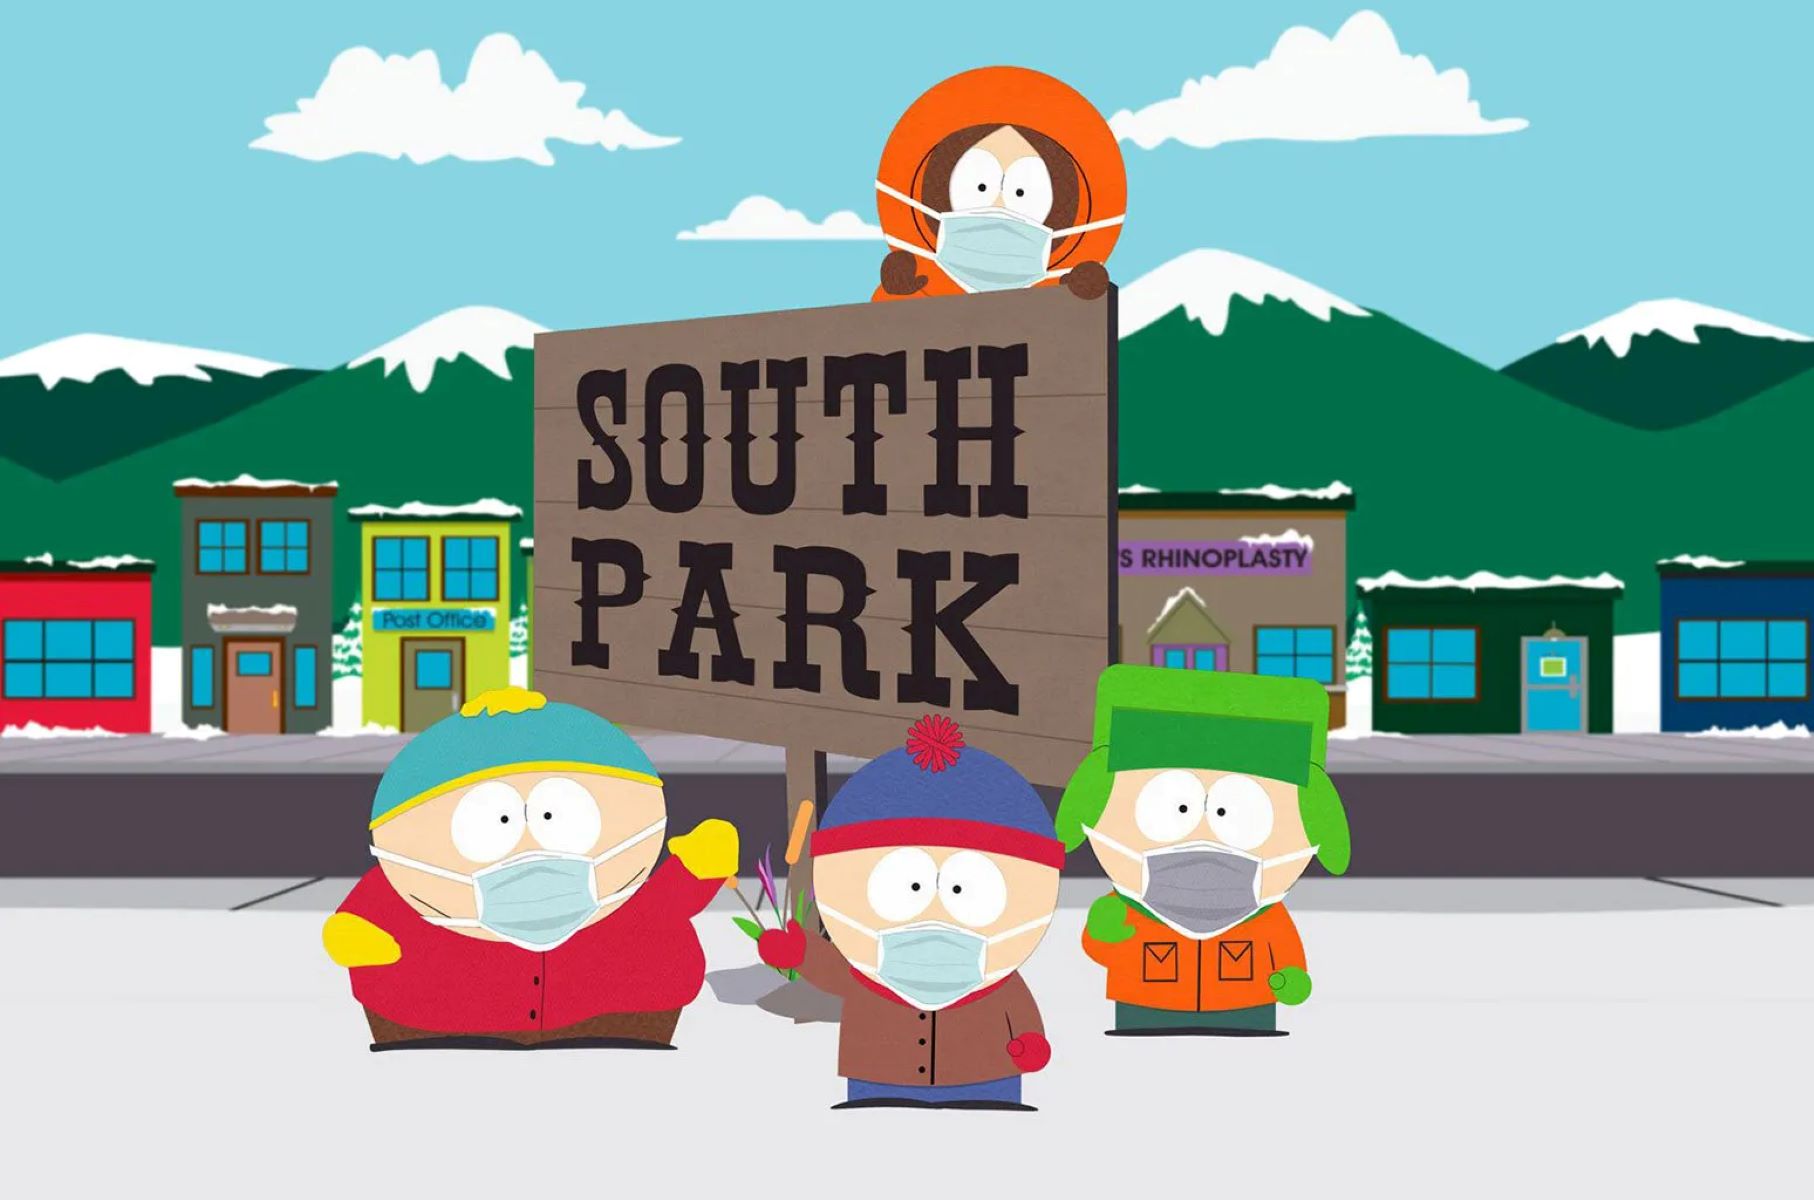 How To Watch New South Park